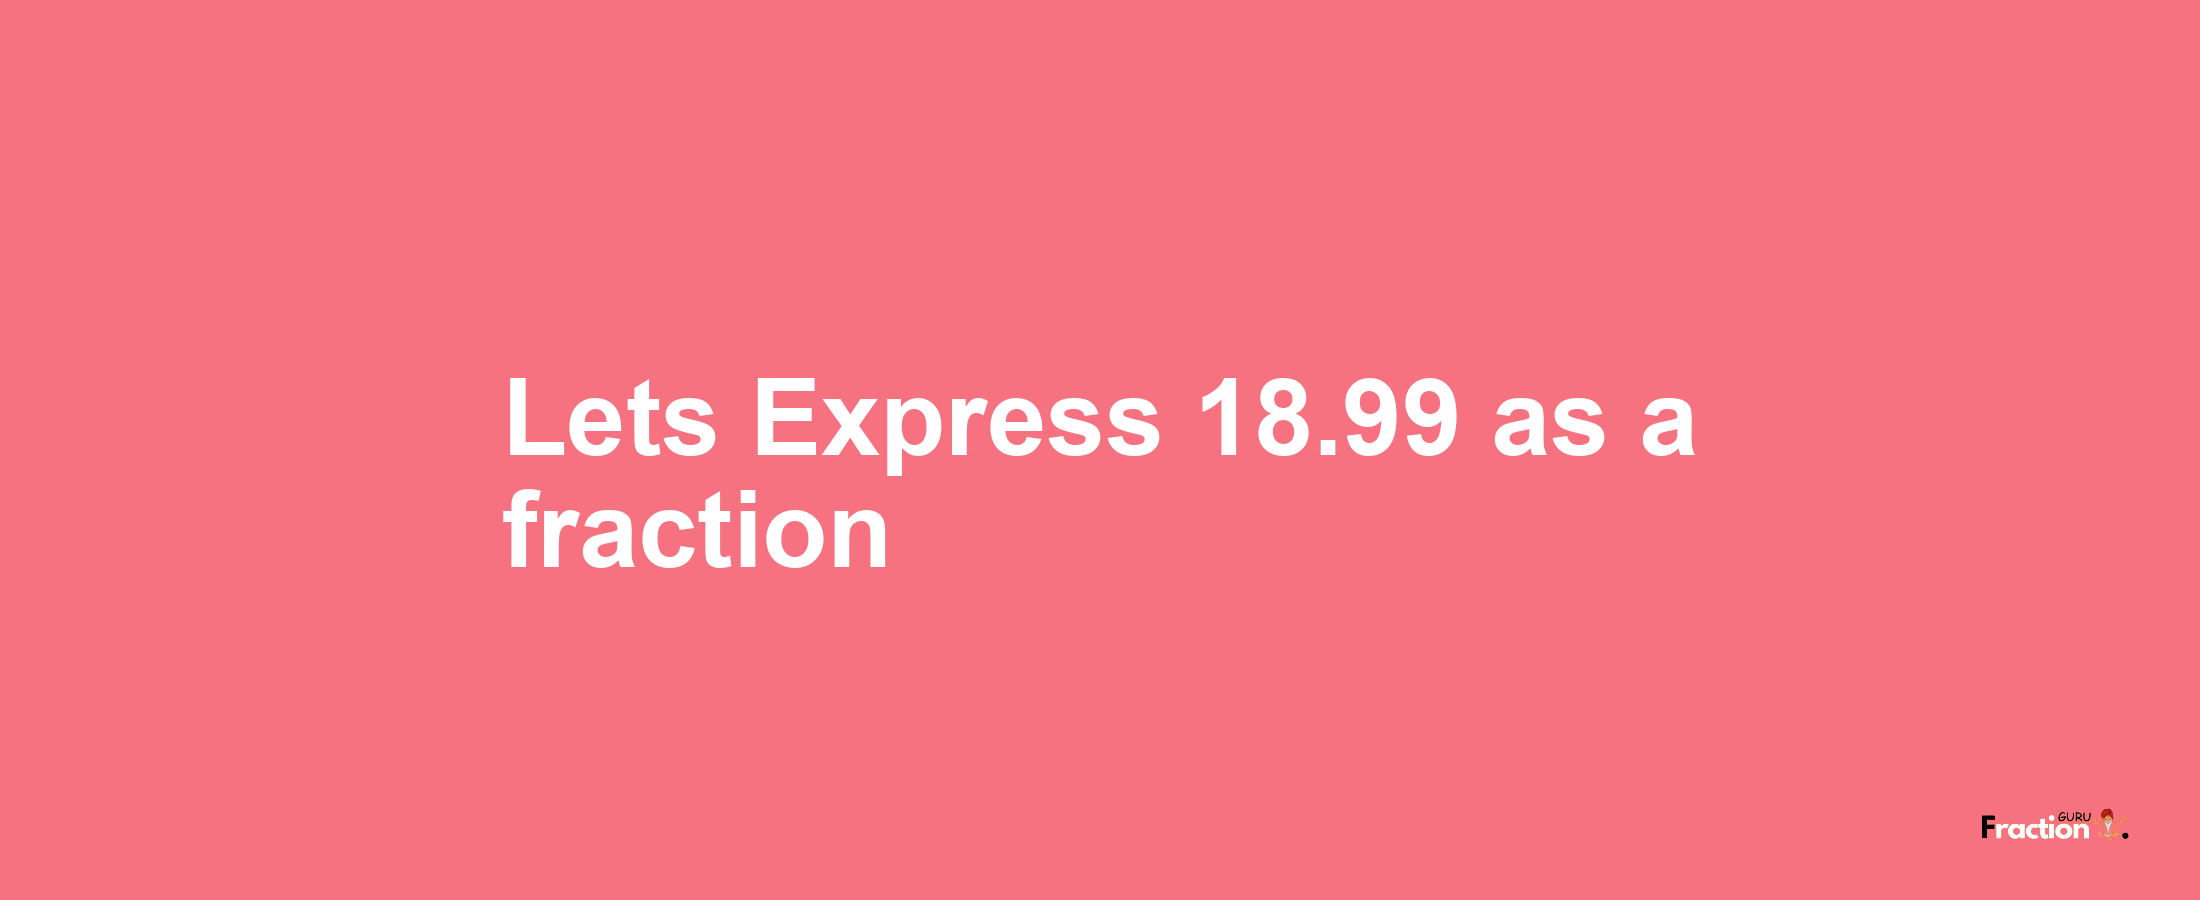 Lets Express 18.99 as afraction